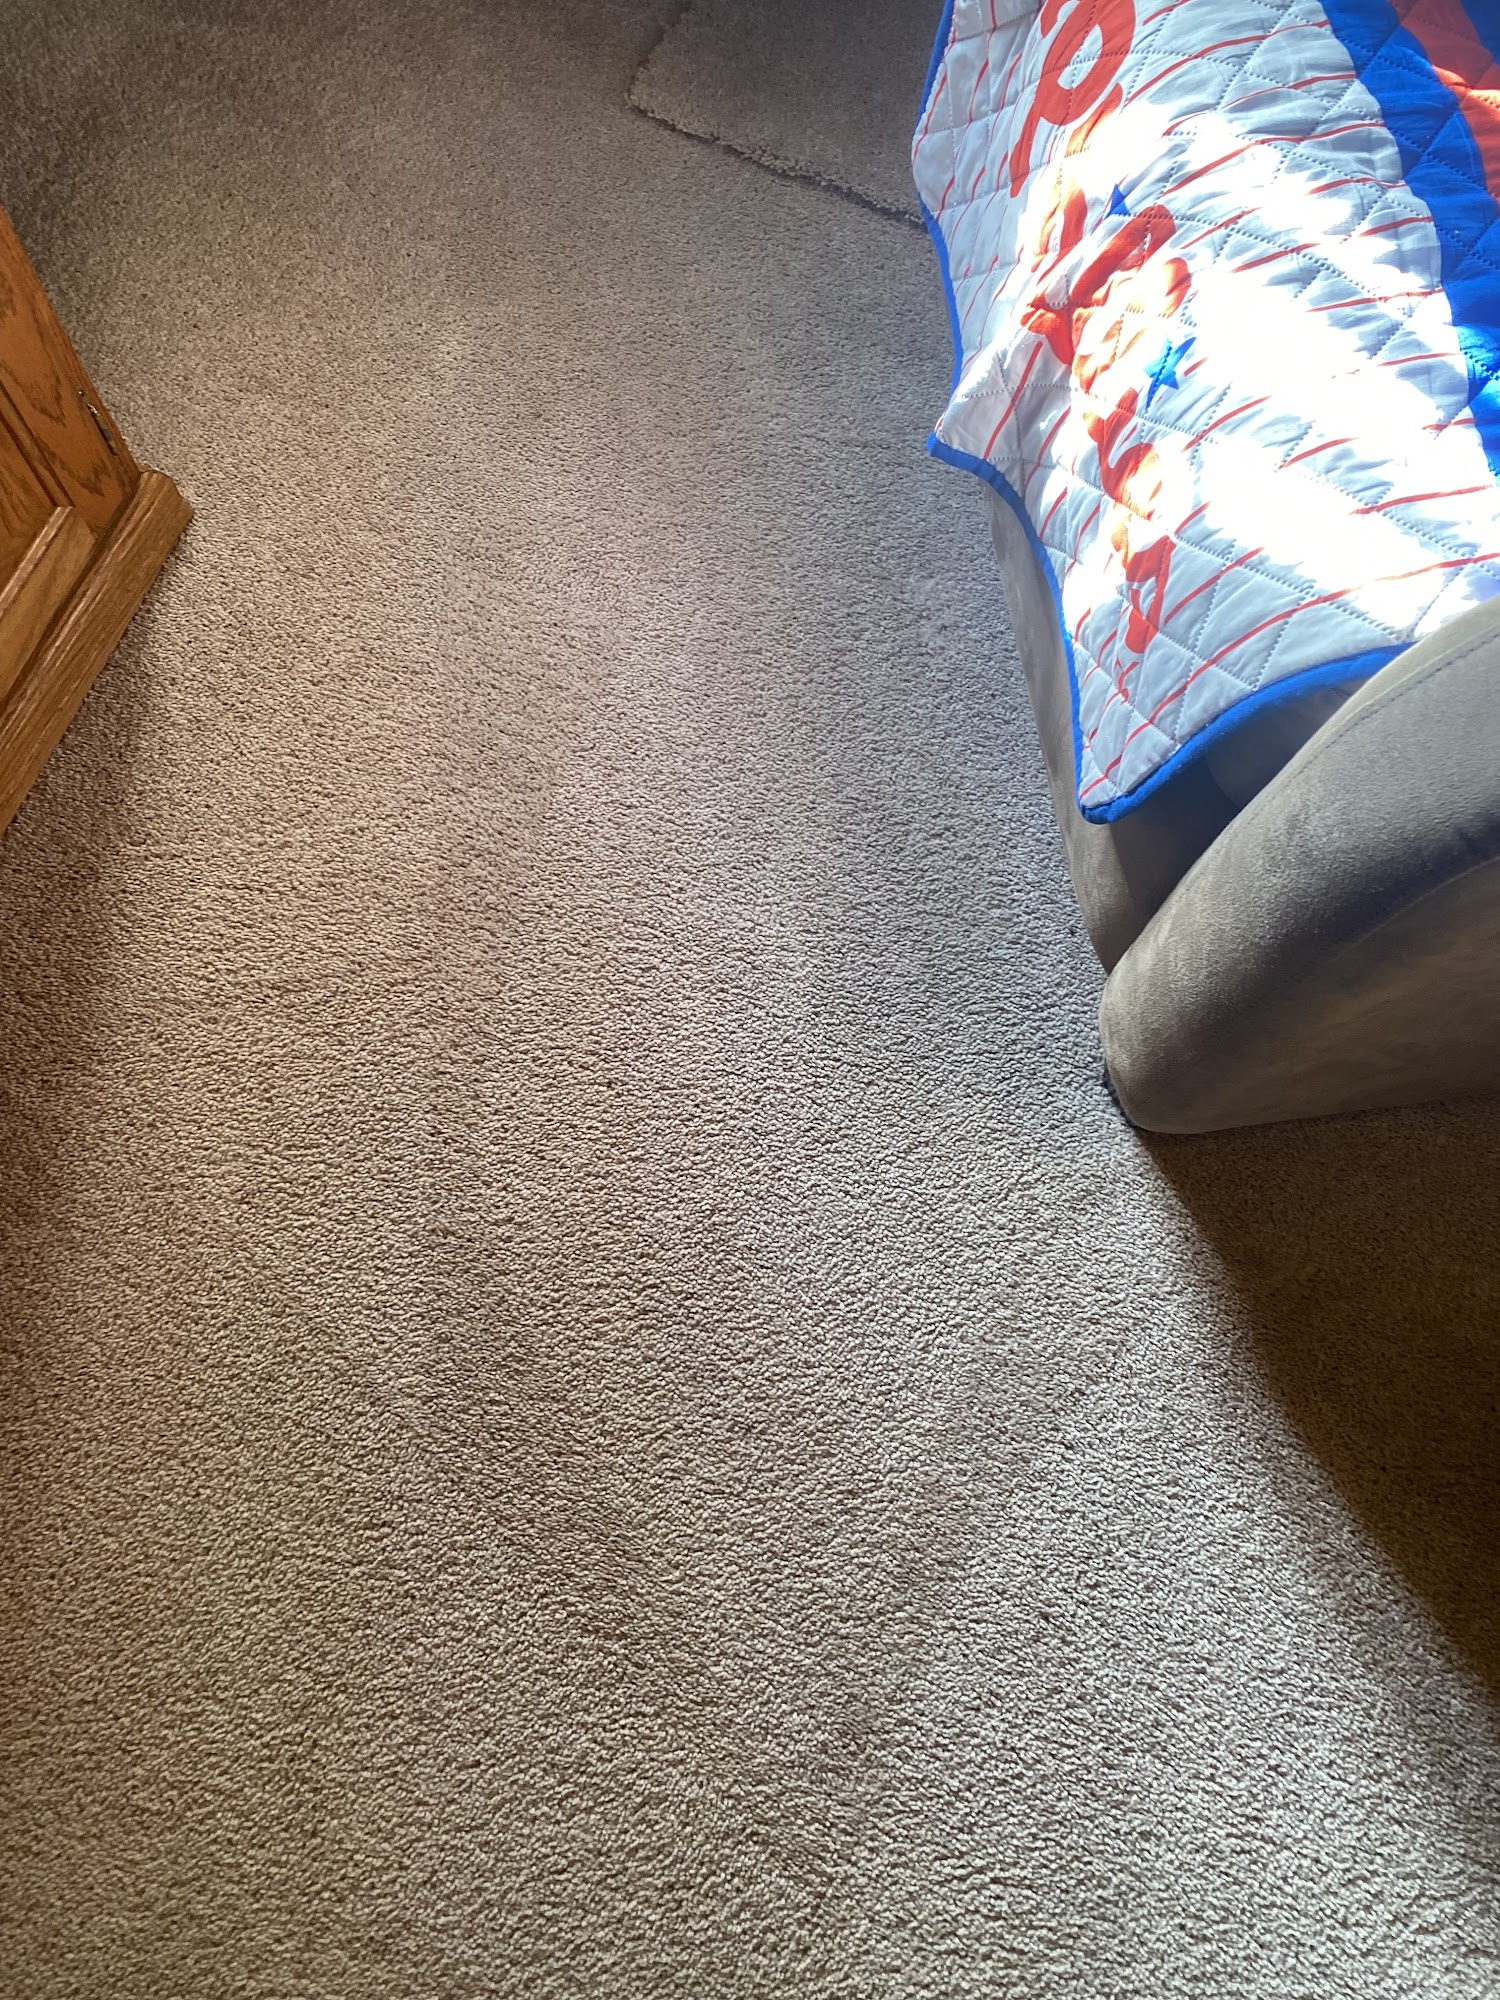 JDog Carpet Cleaning & Floor Care Aston & Southern Chester County